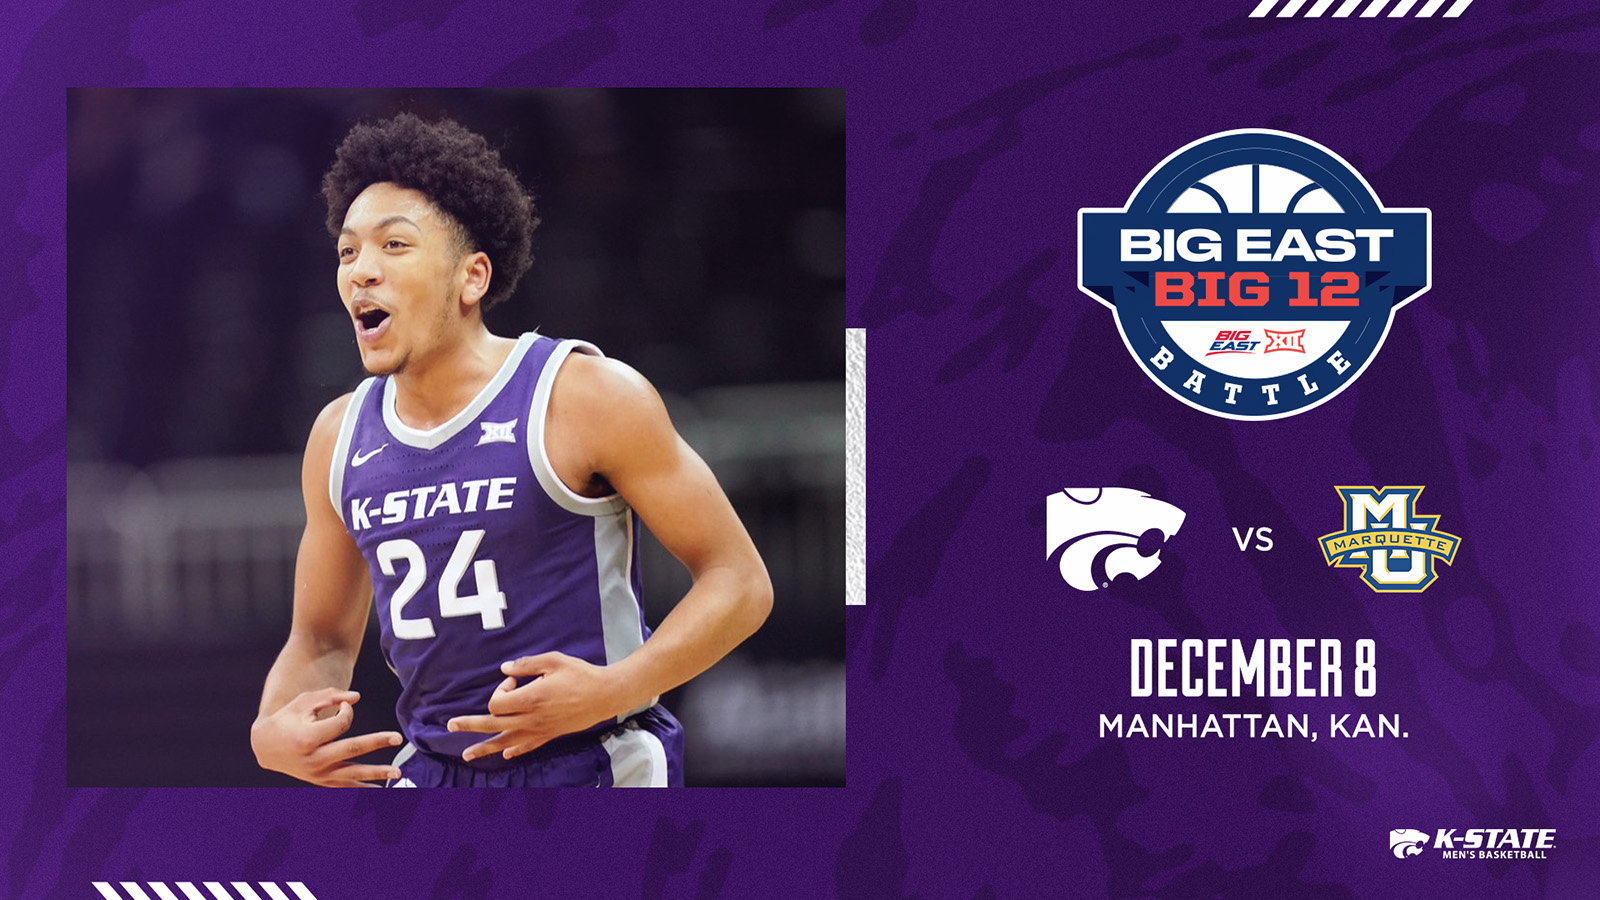 KState to Host Marquette in BIG EAST/Big 12 Battle